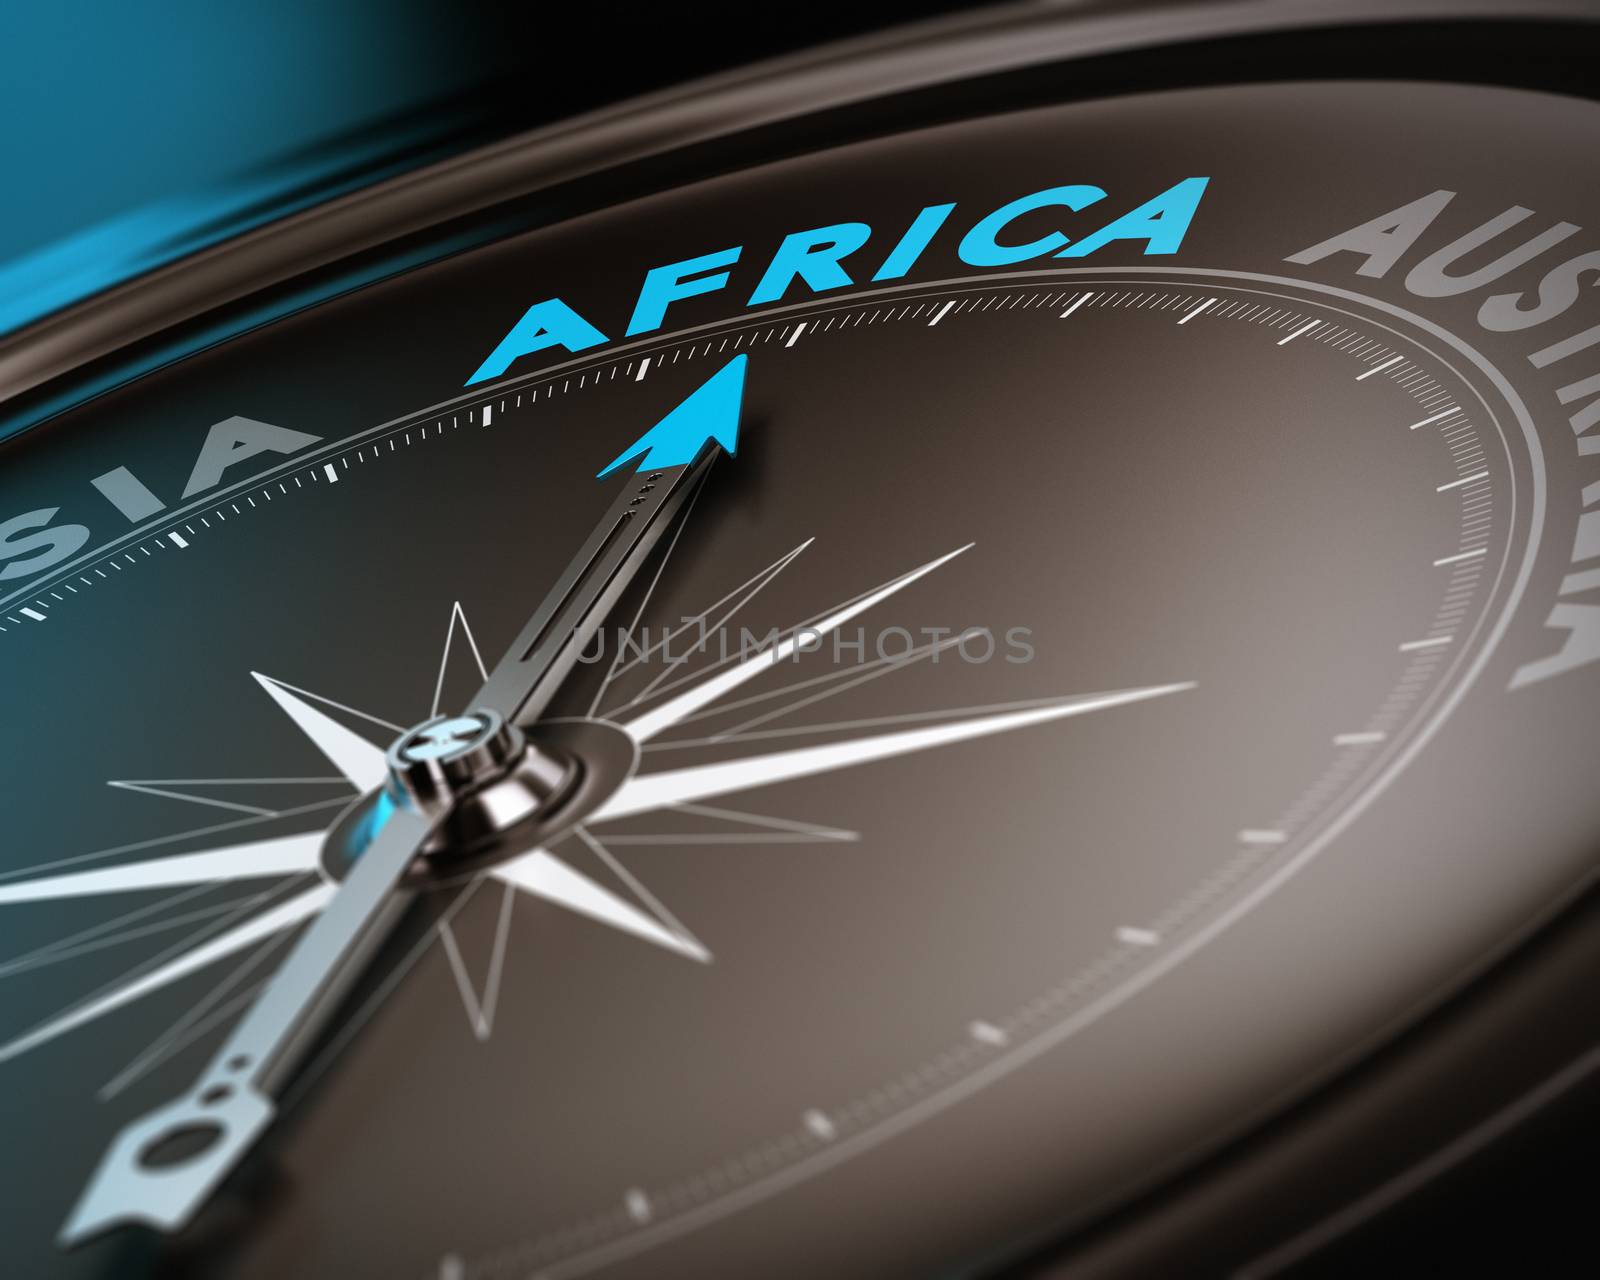 Abstract compass needle pointing the destination africa, blue and brown tones with focus on the main word. Concept image suitable for illustration of trip counseling.